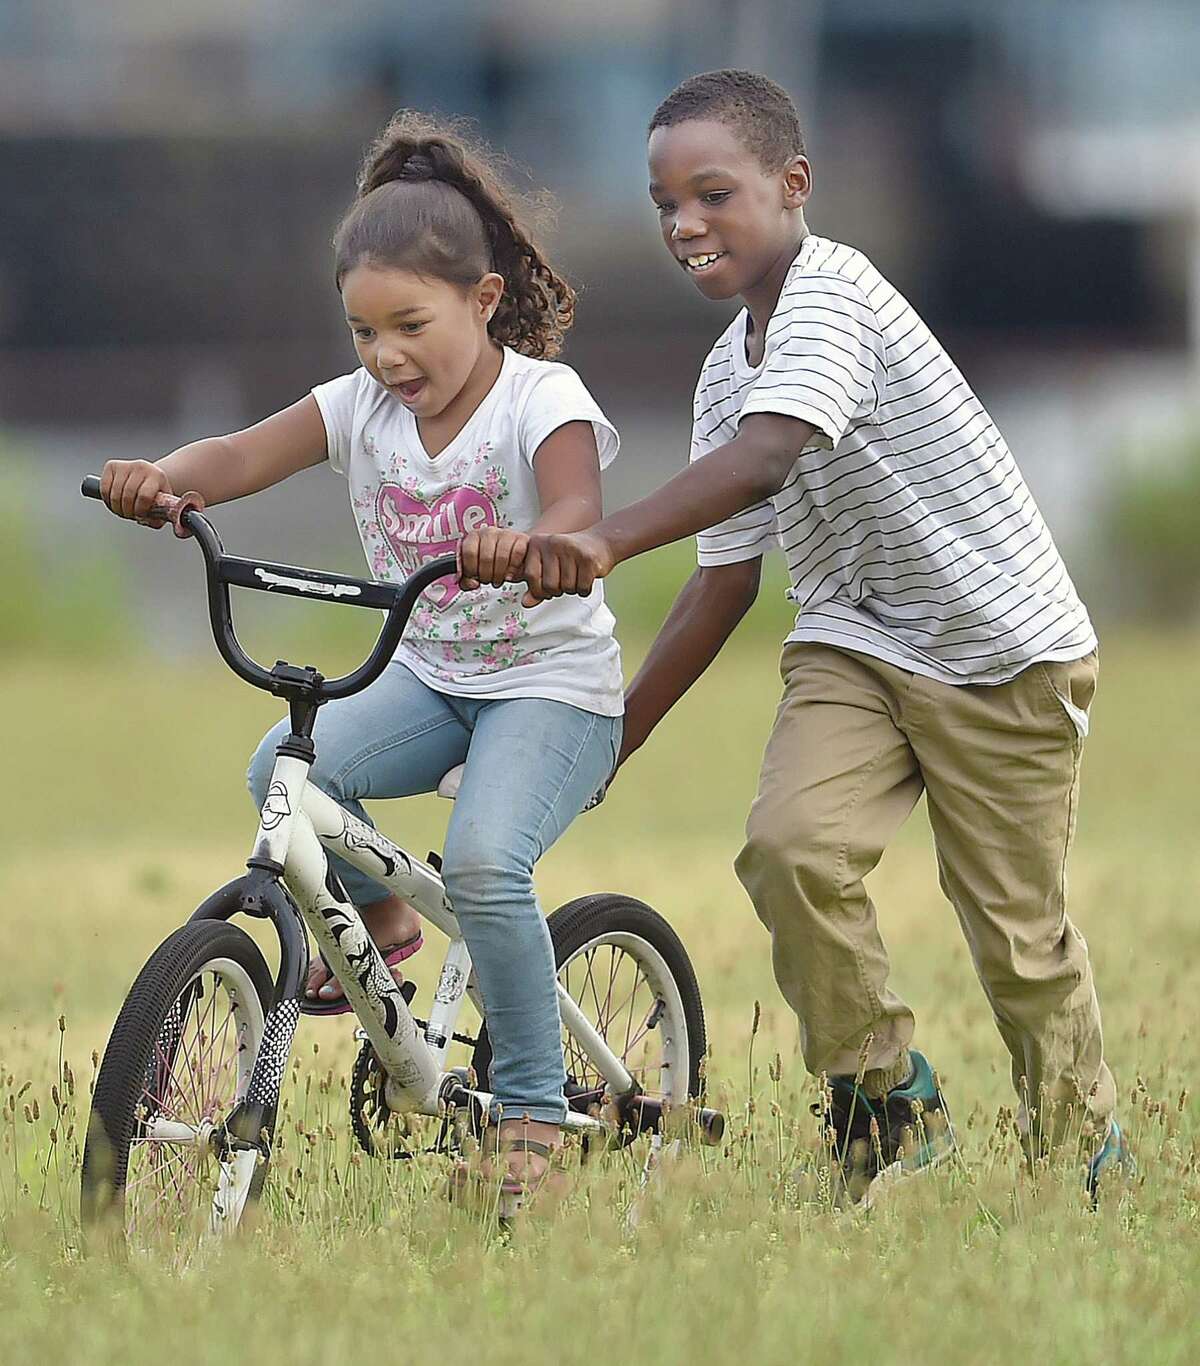 Naeem Jenkins, 10, teaches 5-year-old Kaylany Fargas how to ride a bike. We all need a little more kindness in our lives.